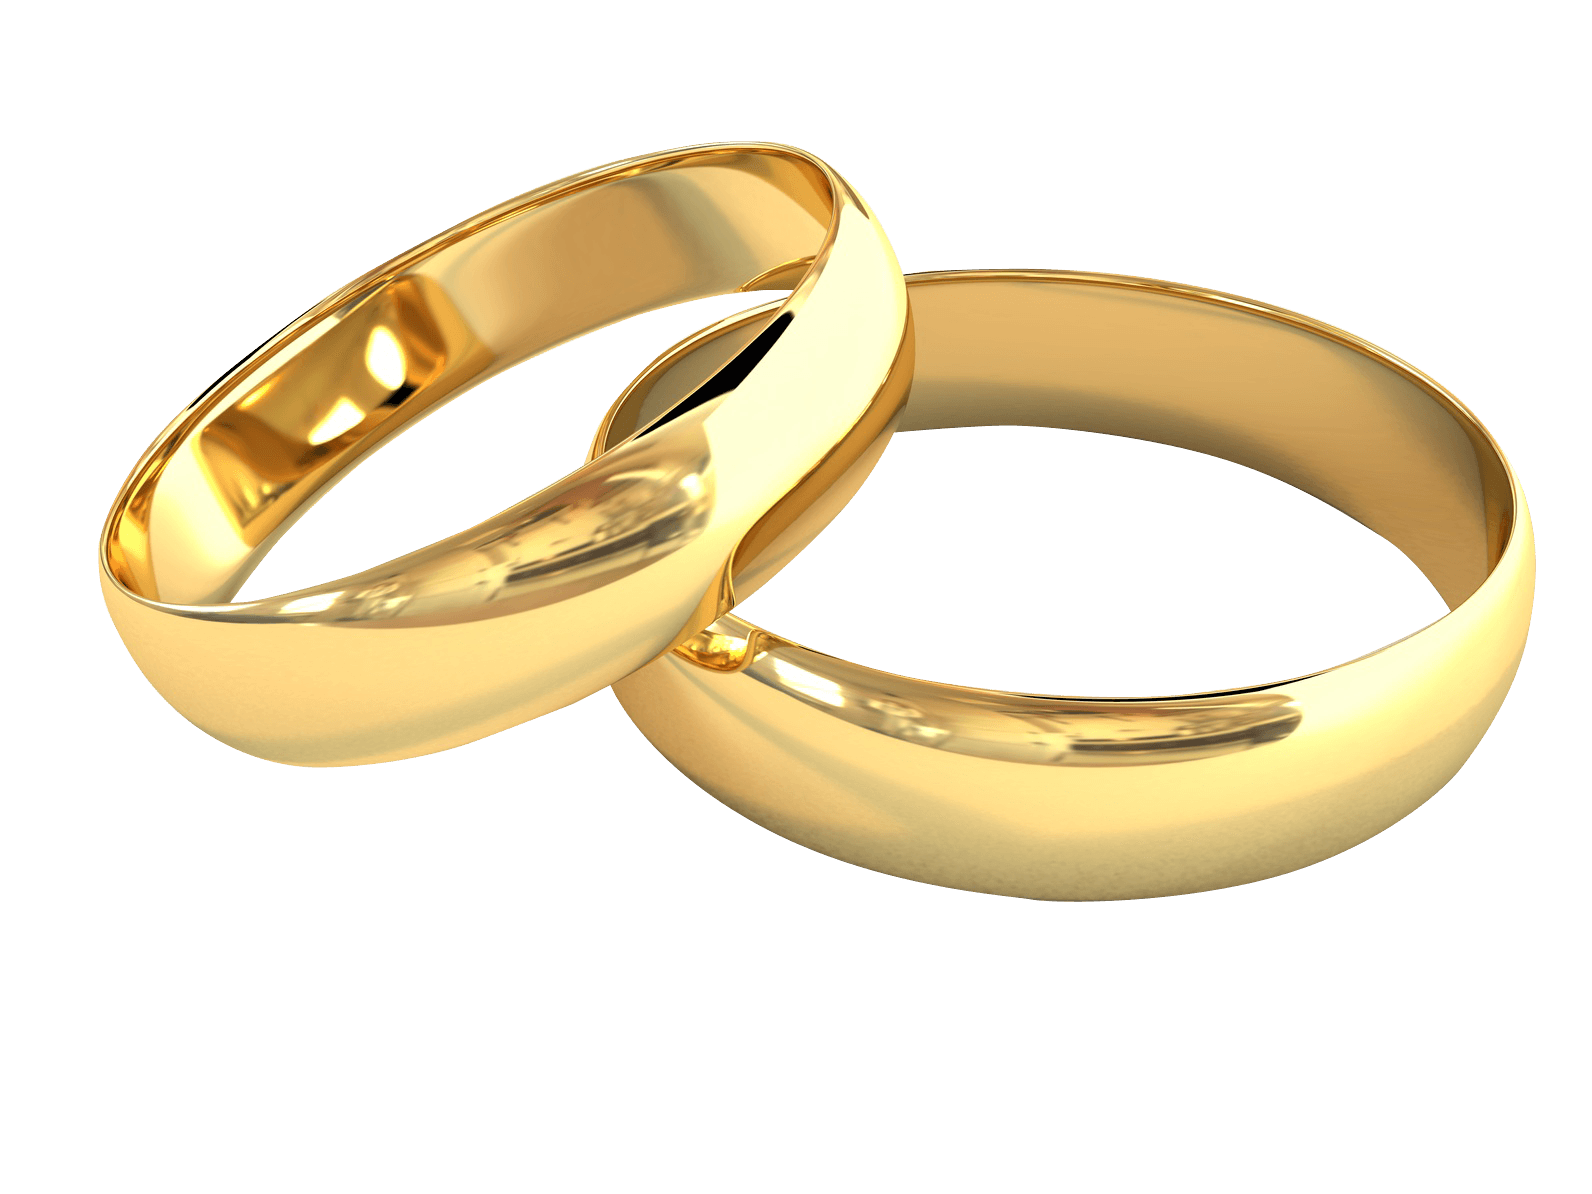 Golden Rings Png Image PNG Image